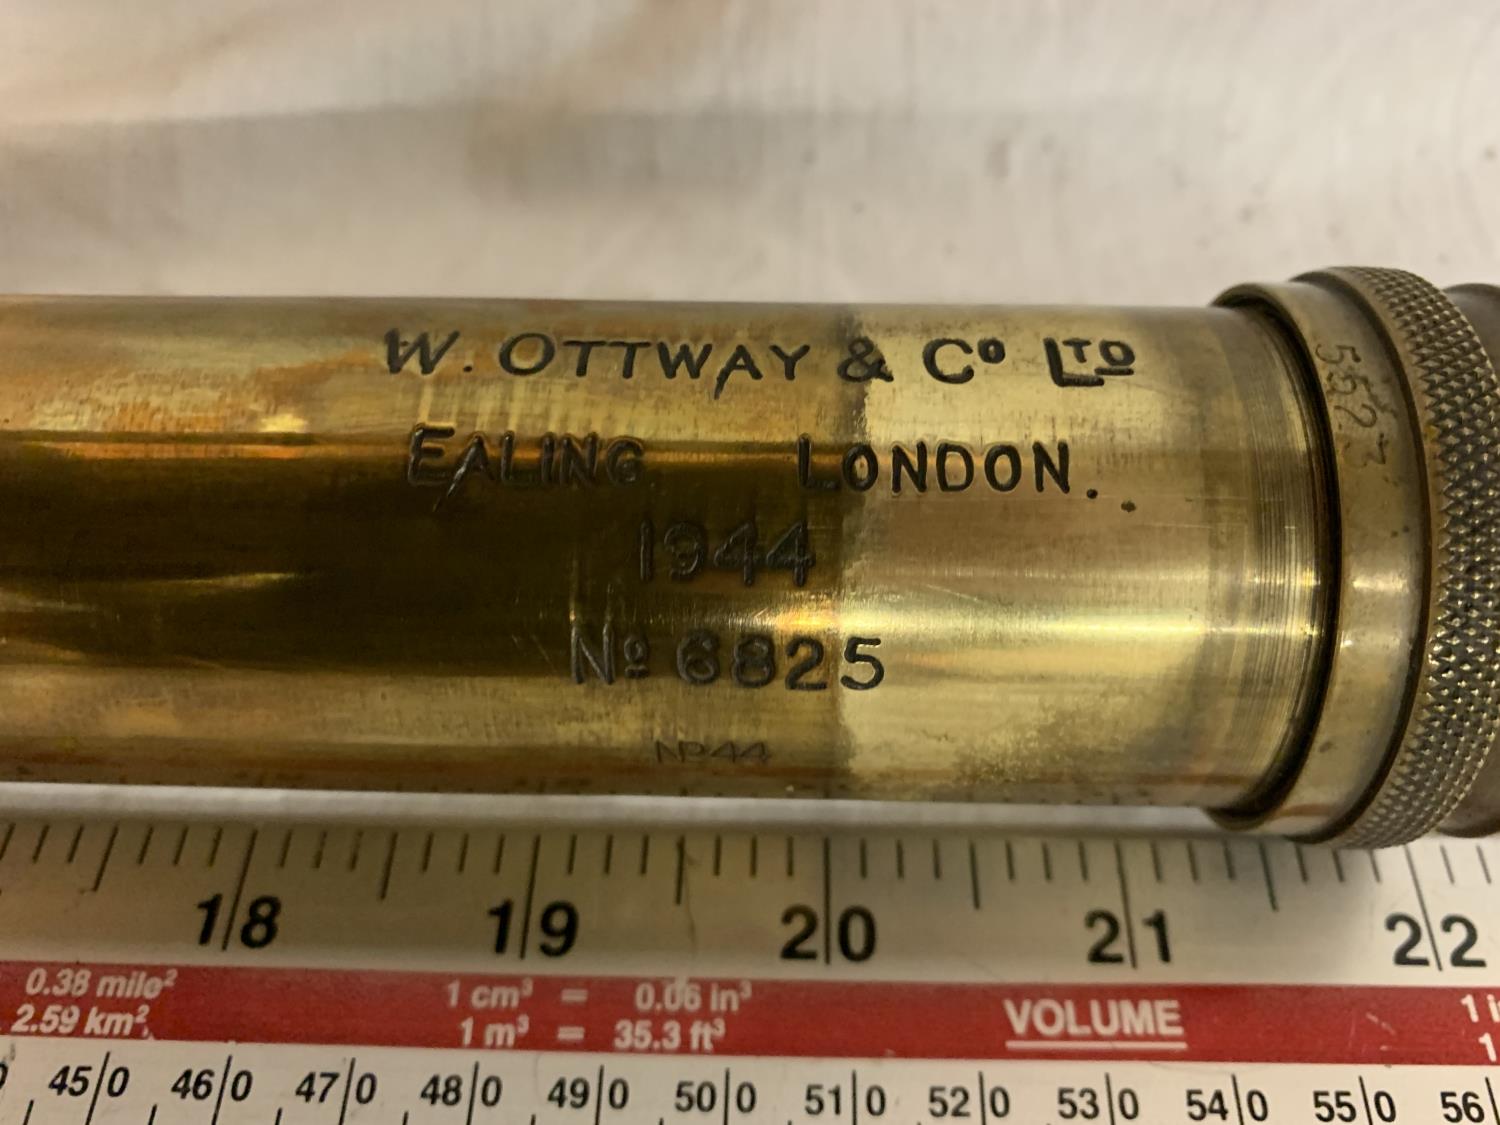 A 'W OTTWAY AND CO LTD' EALING LONDON 1944 NO. 6825 TELESCOPE - Image 4 of 5